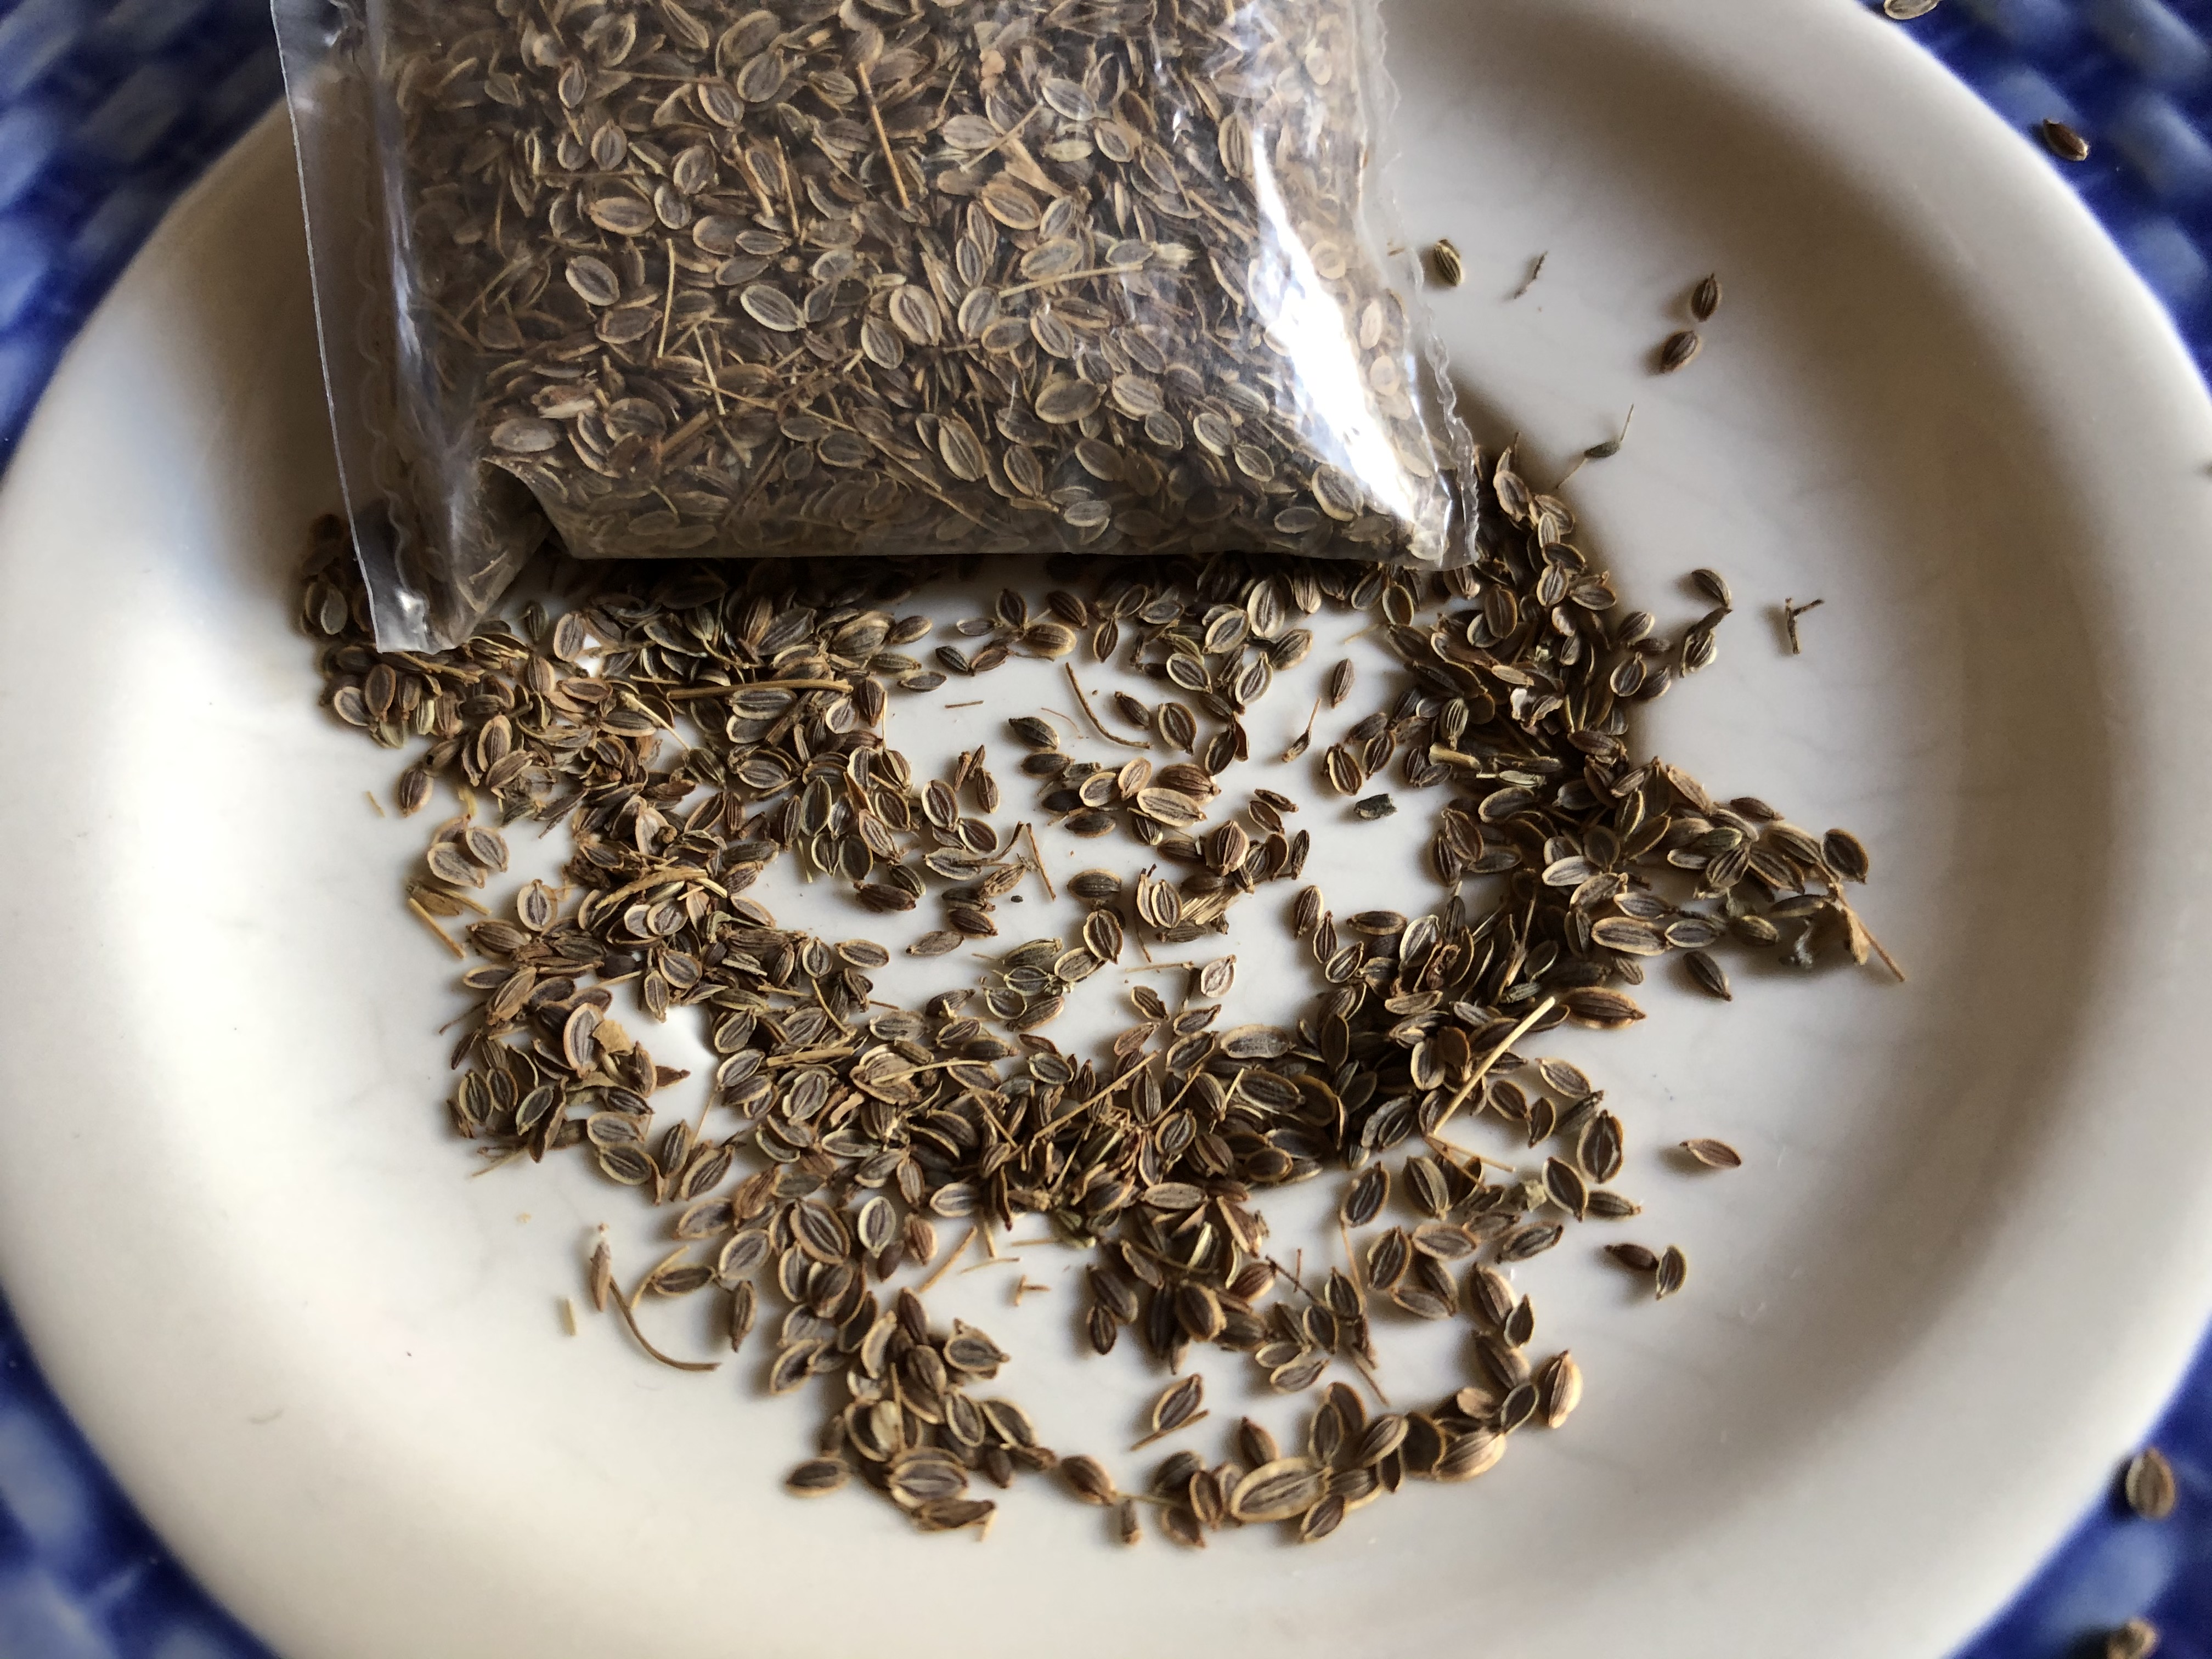 Dill seeds are flat, oval, with a light-brown color.